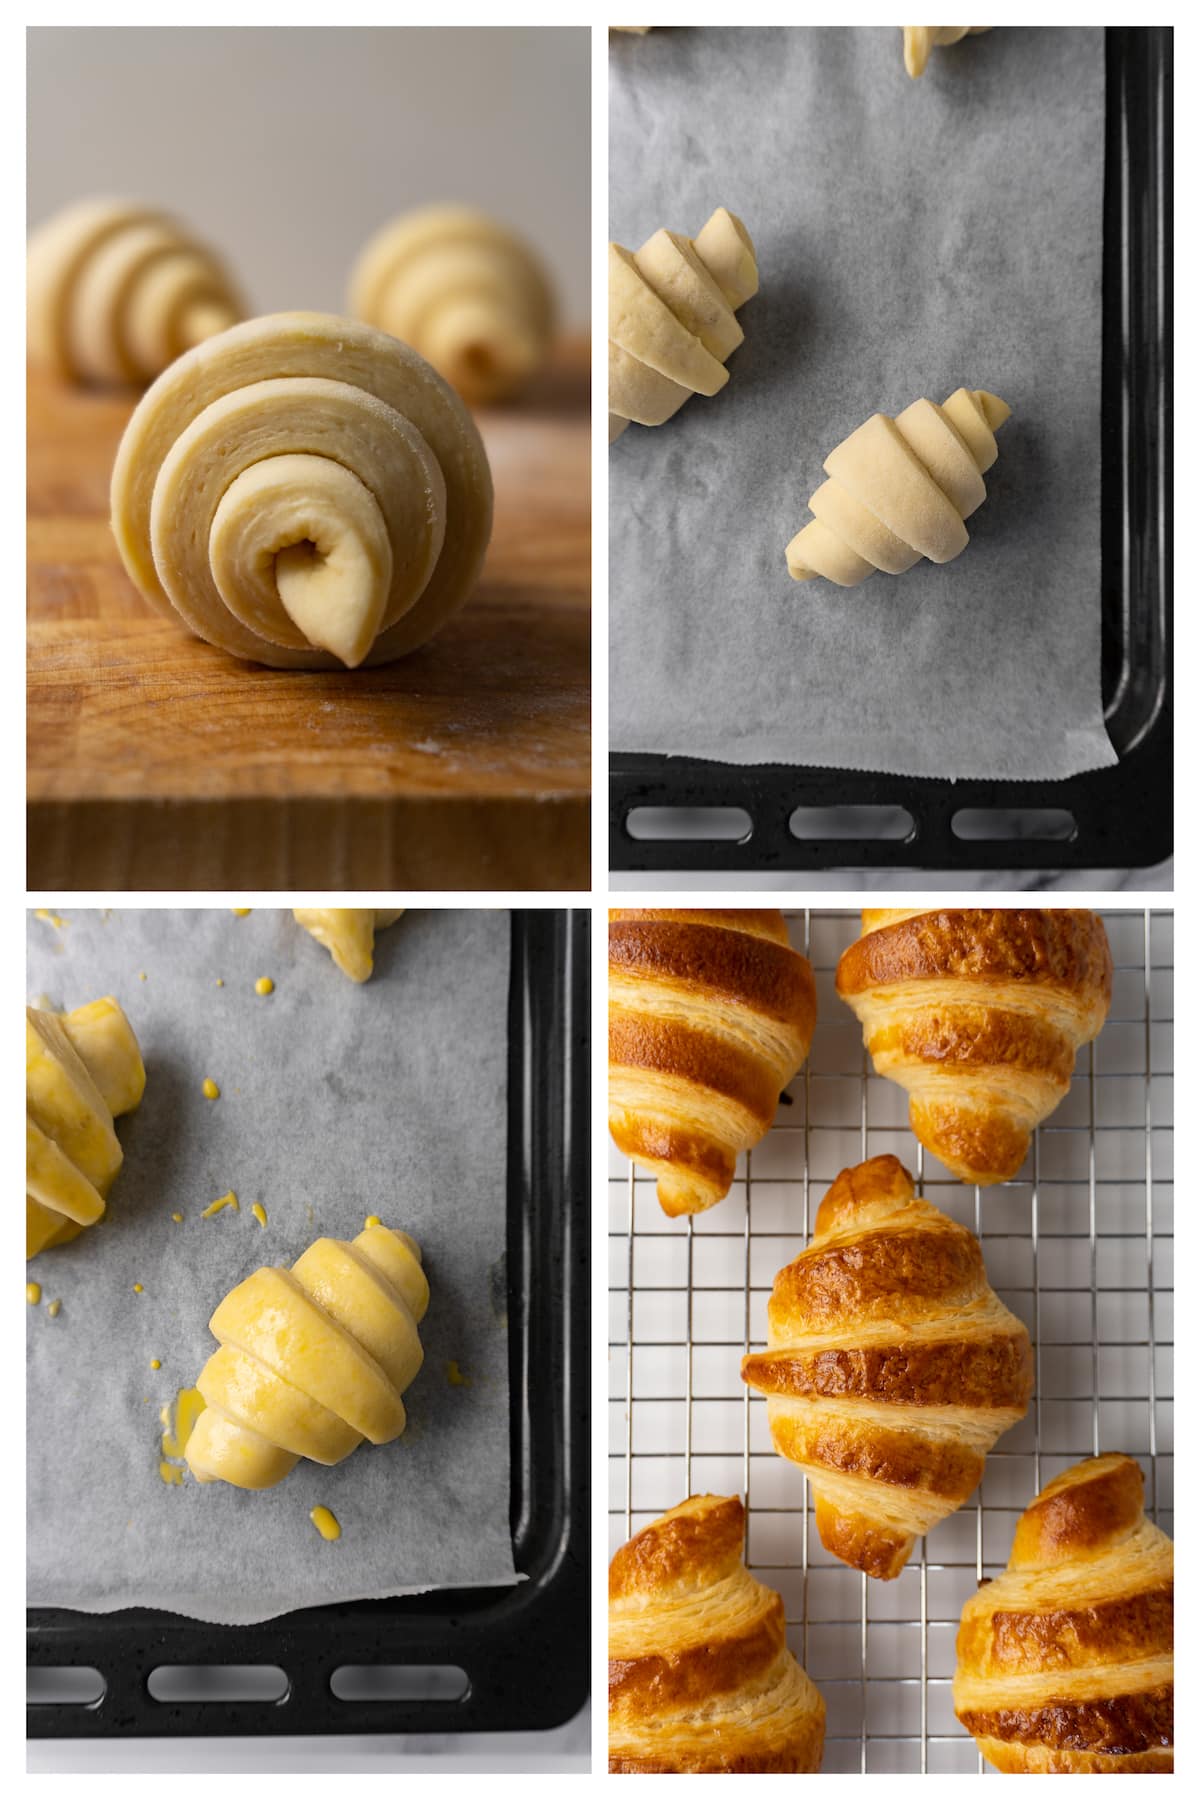 The collage image shows four steps to proof and bake croissants.